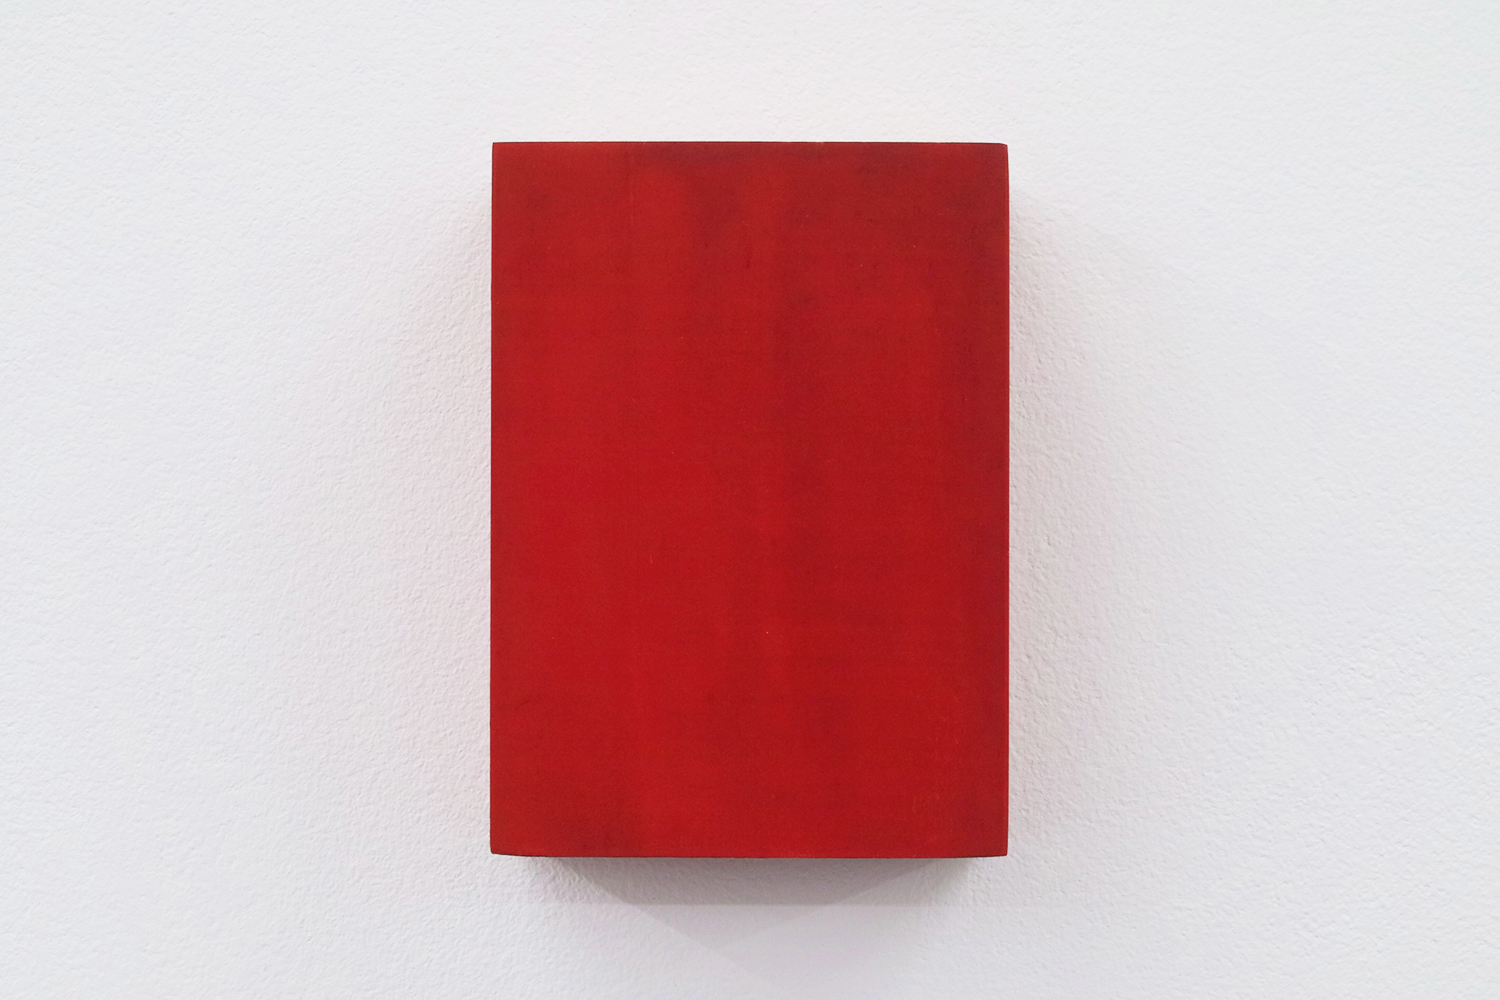 Text No. 434｜pigment, acrylic on wood｜83 x 61 x 27 mm｜2003<br>¥50,000 - 150,000